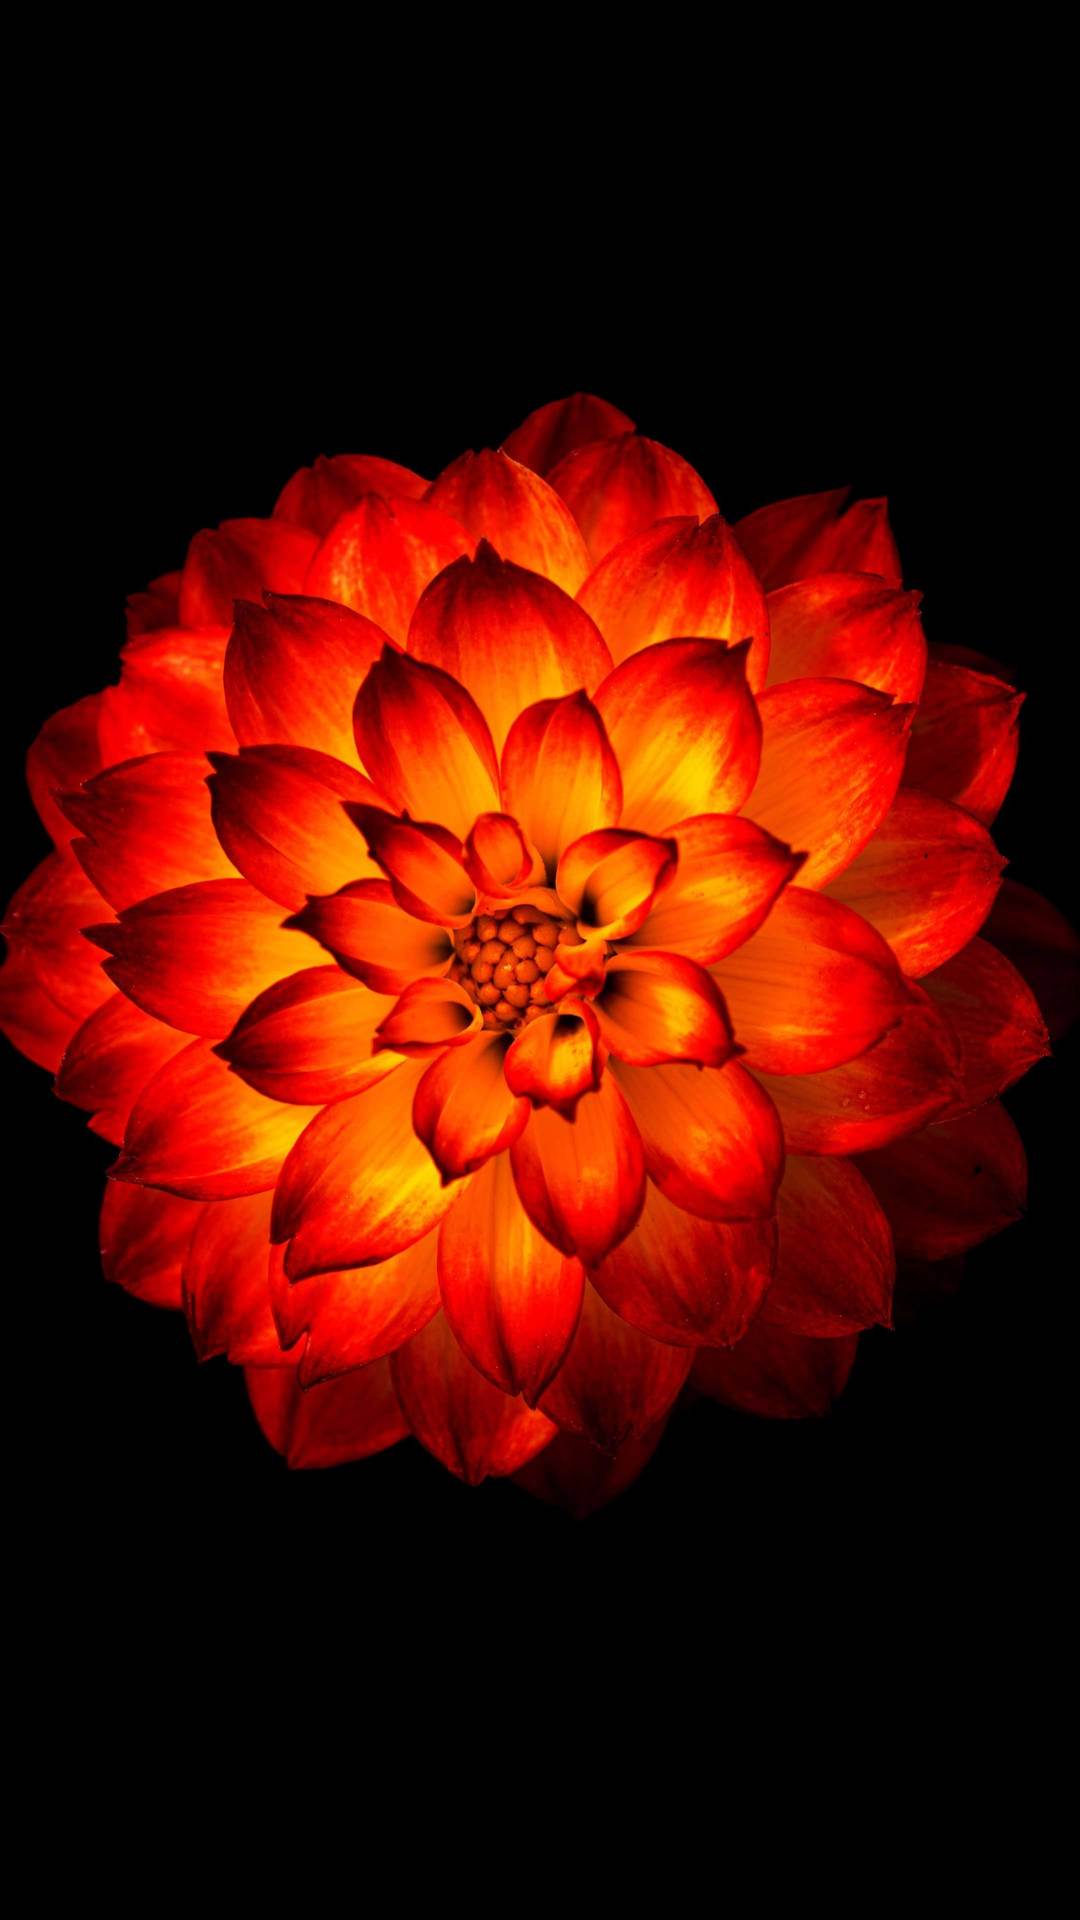 Ethereal Glow Of A Dahlia - Flower Phone Wallpaper Background